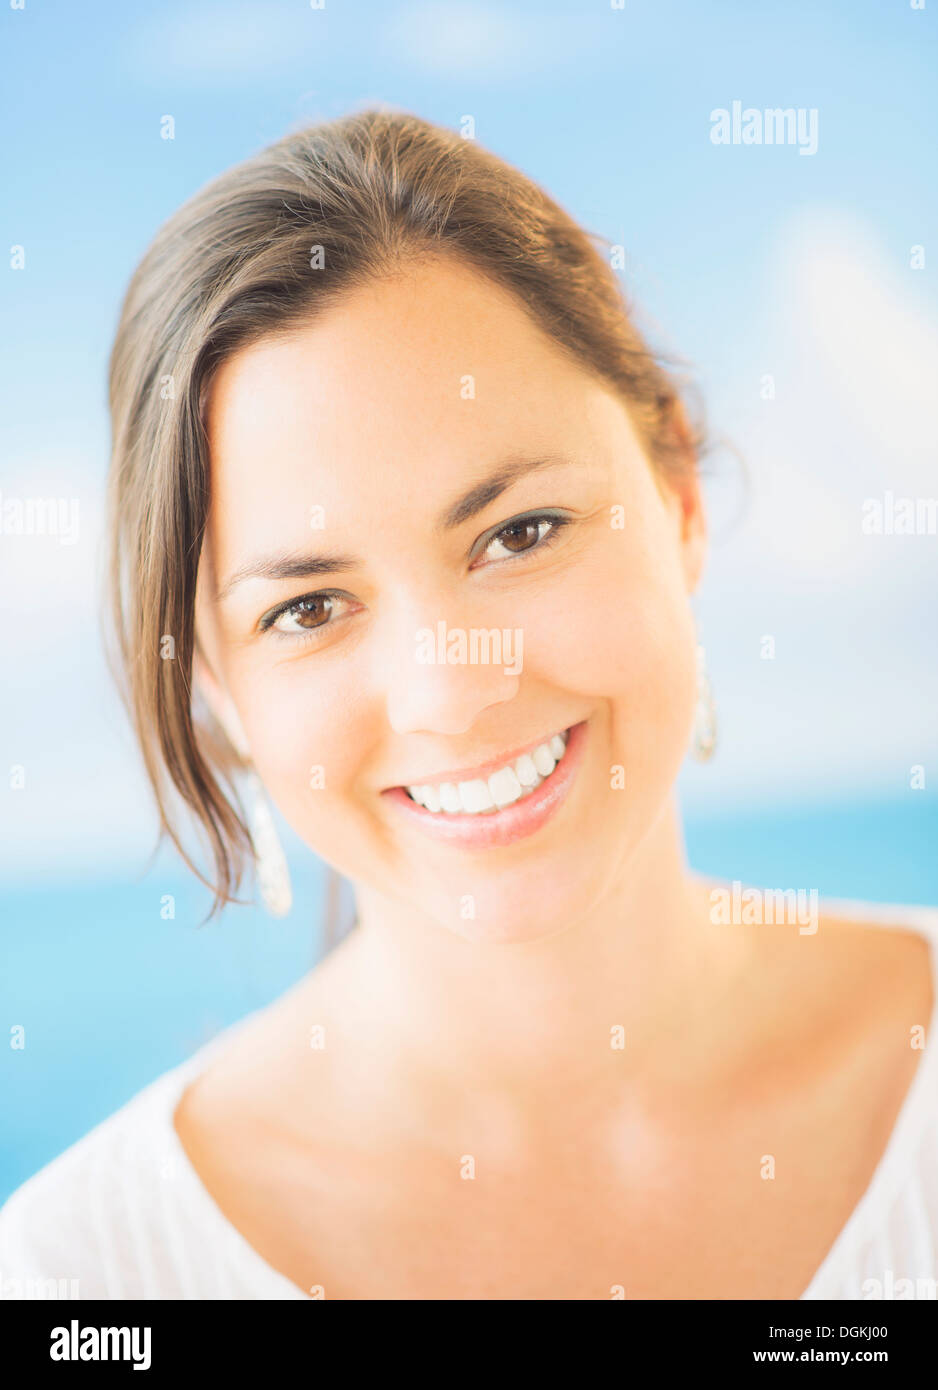 Portrait of smiling woman with brown hair Banque D'Images